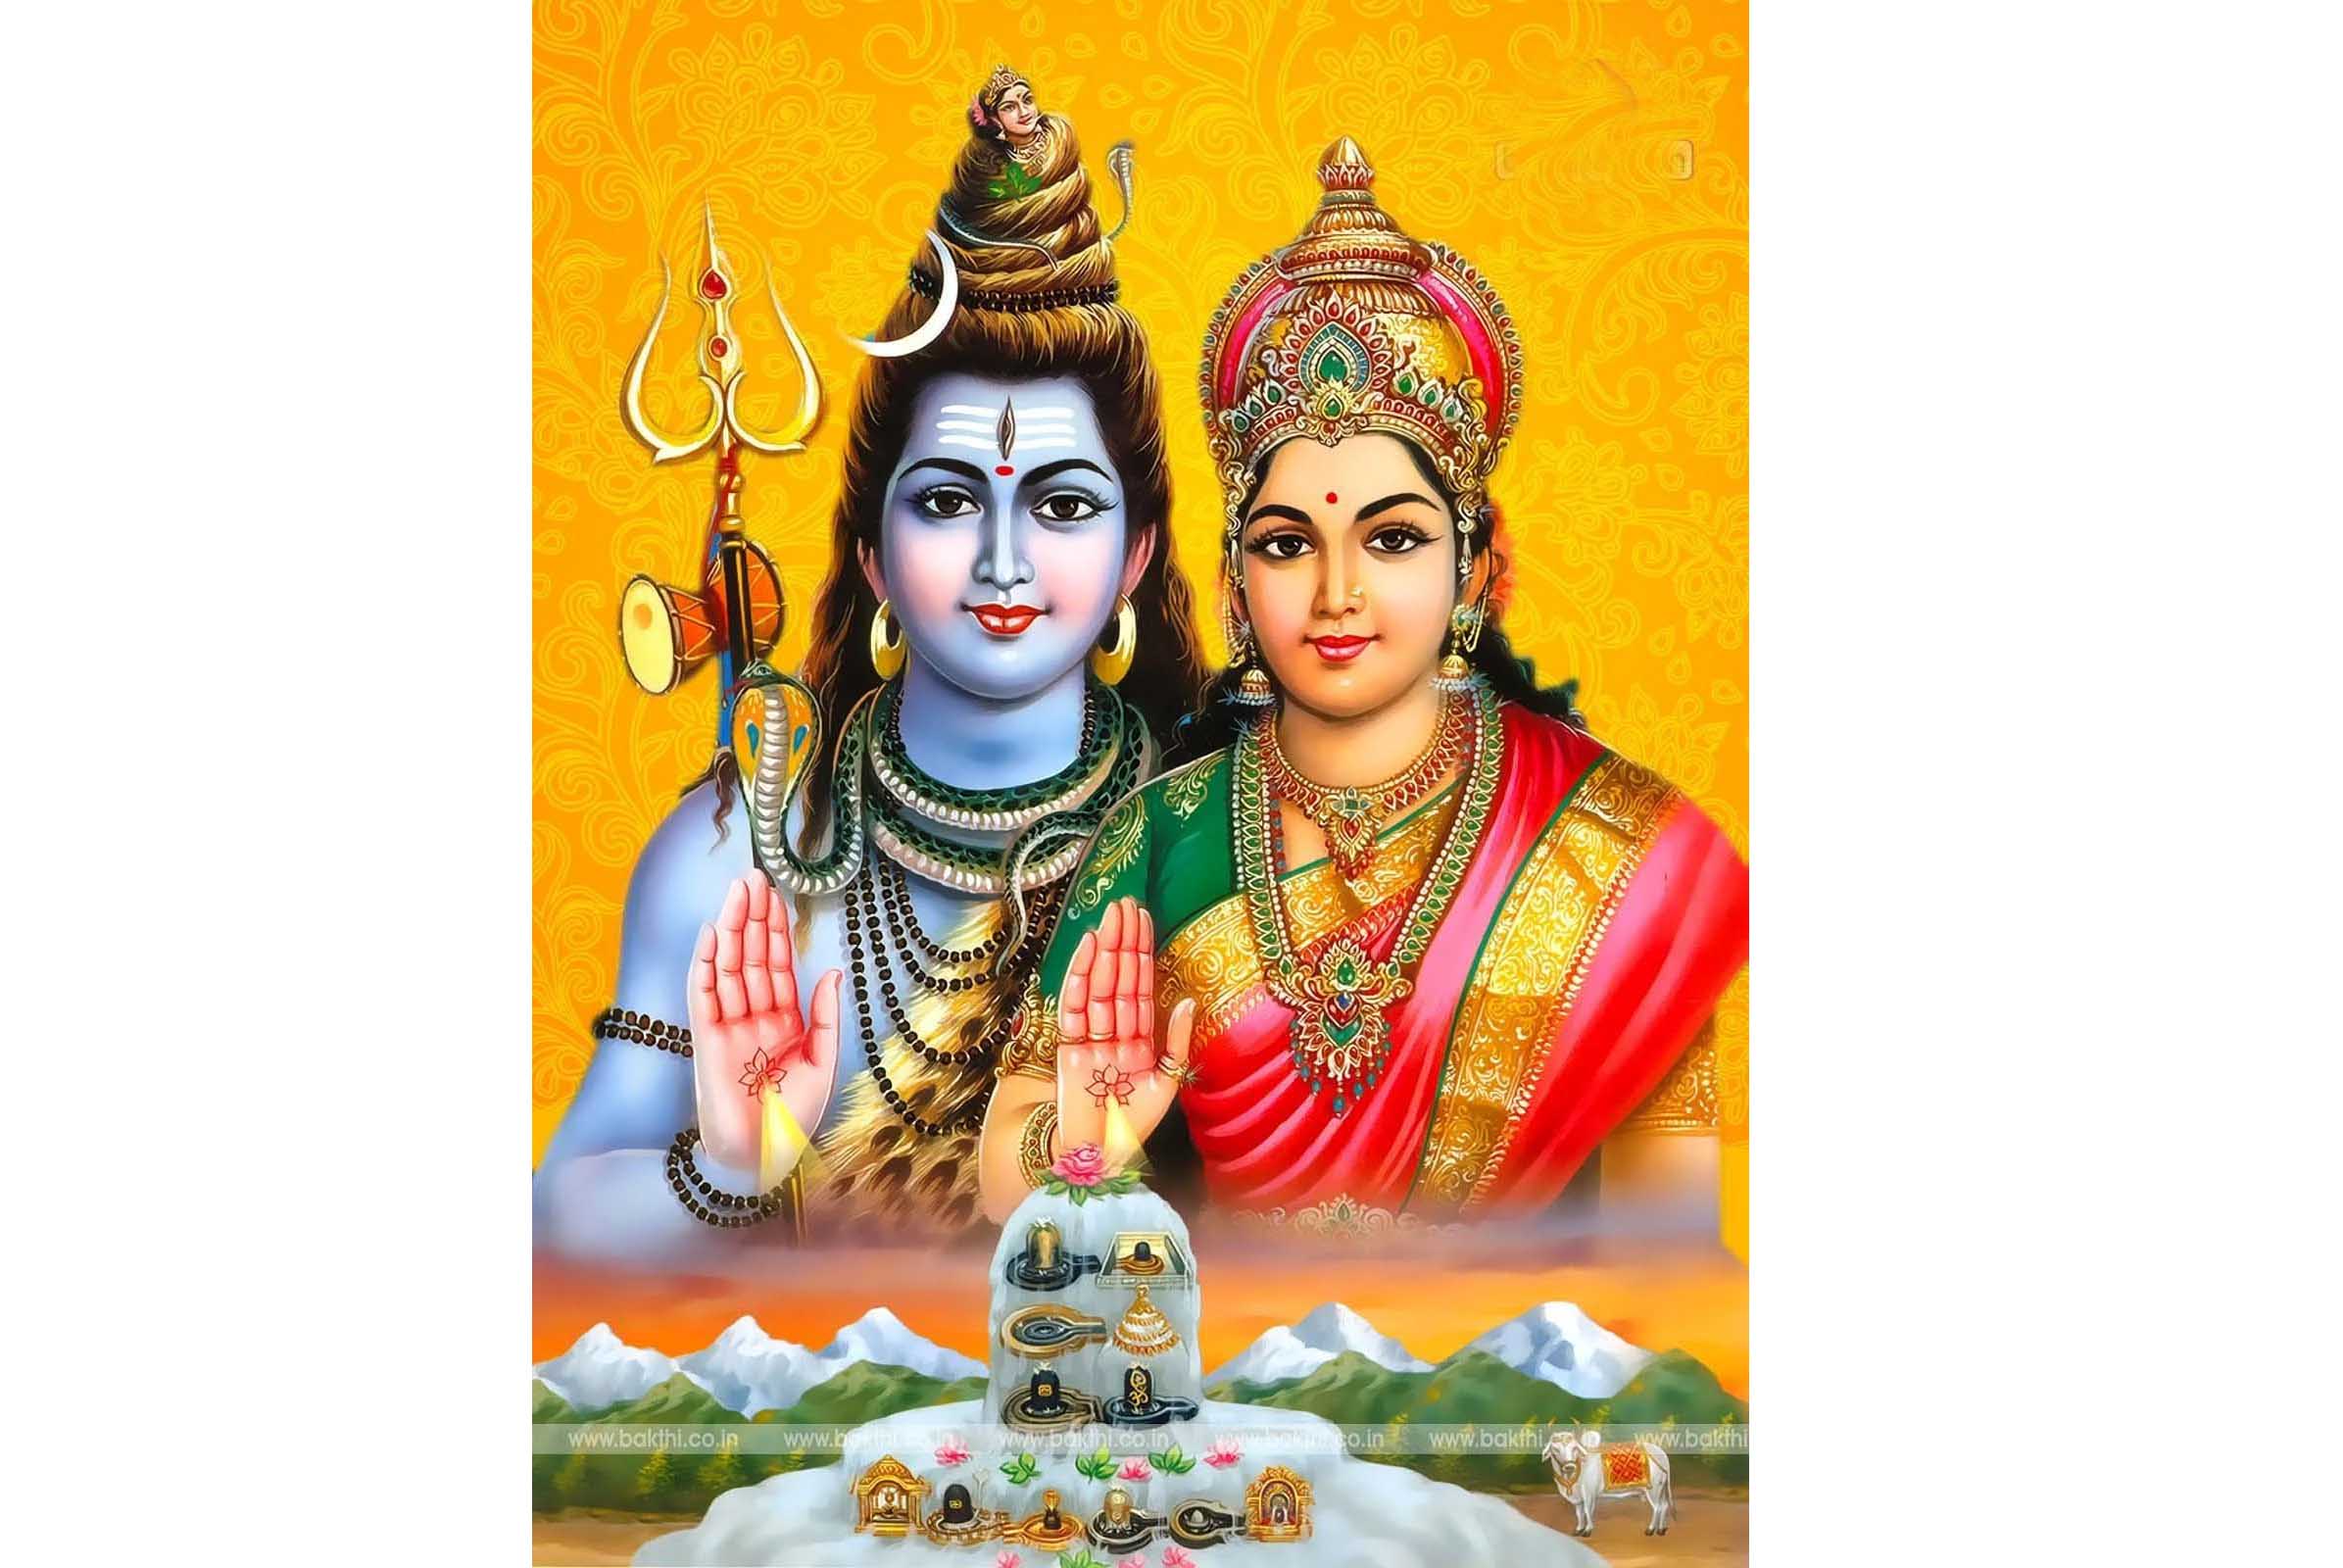 Mahashivratri Greetings to All Our Readers.